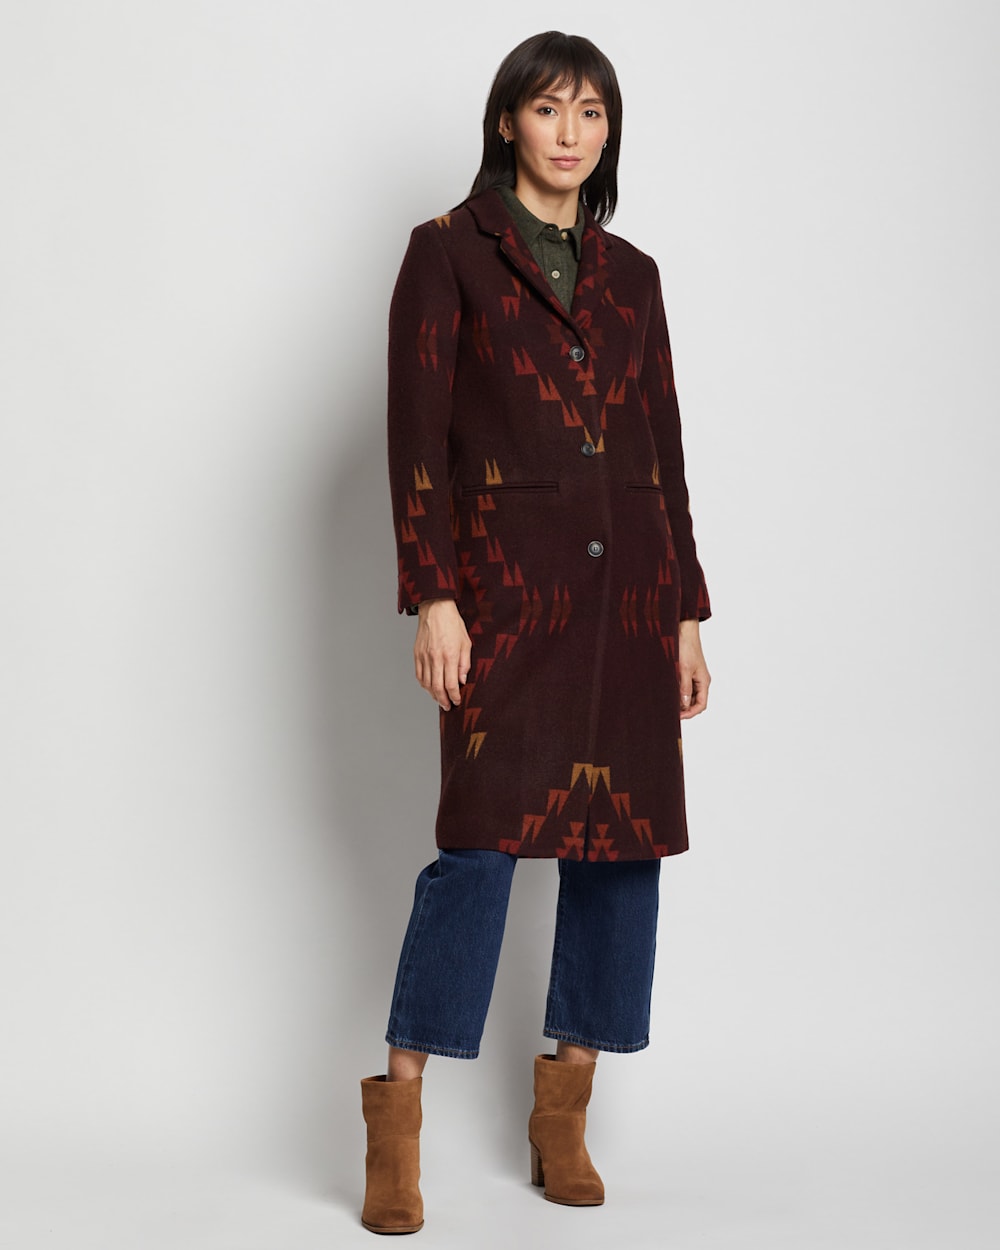 ALTERNATE VIEW OF WOMEN'S JACKSONVILLE WOOL COAT IN CABERNET MISSION TRAILS image number 3